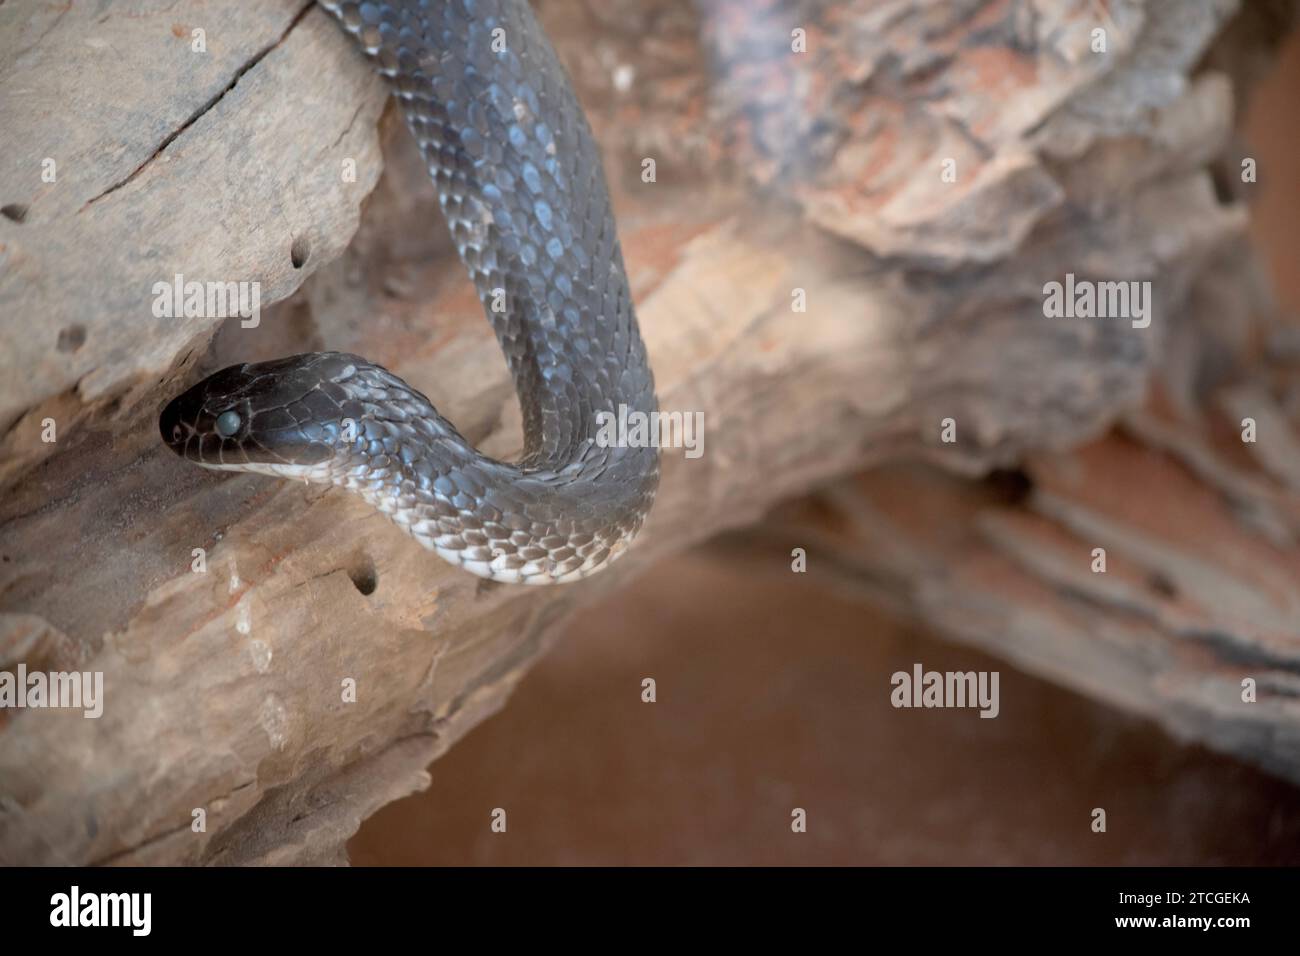 the tiger snake is slithering on a log Stock Photo